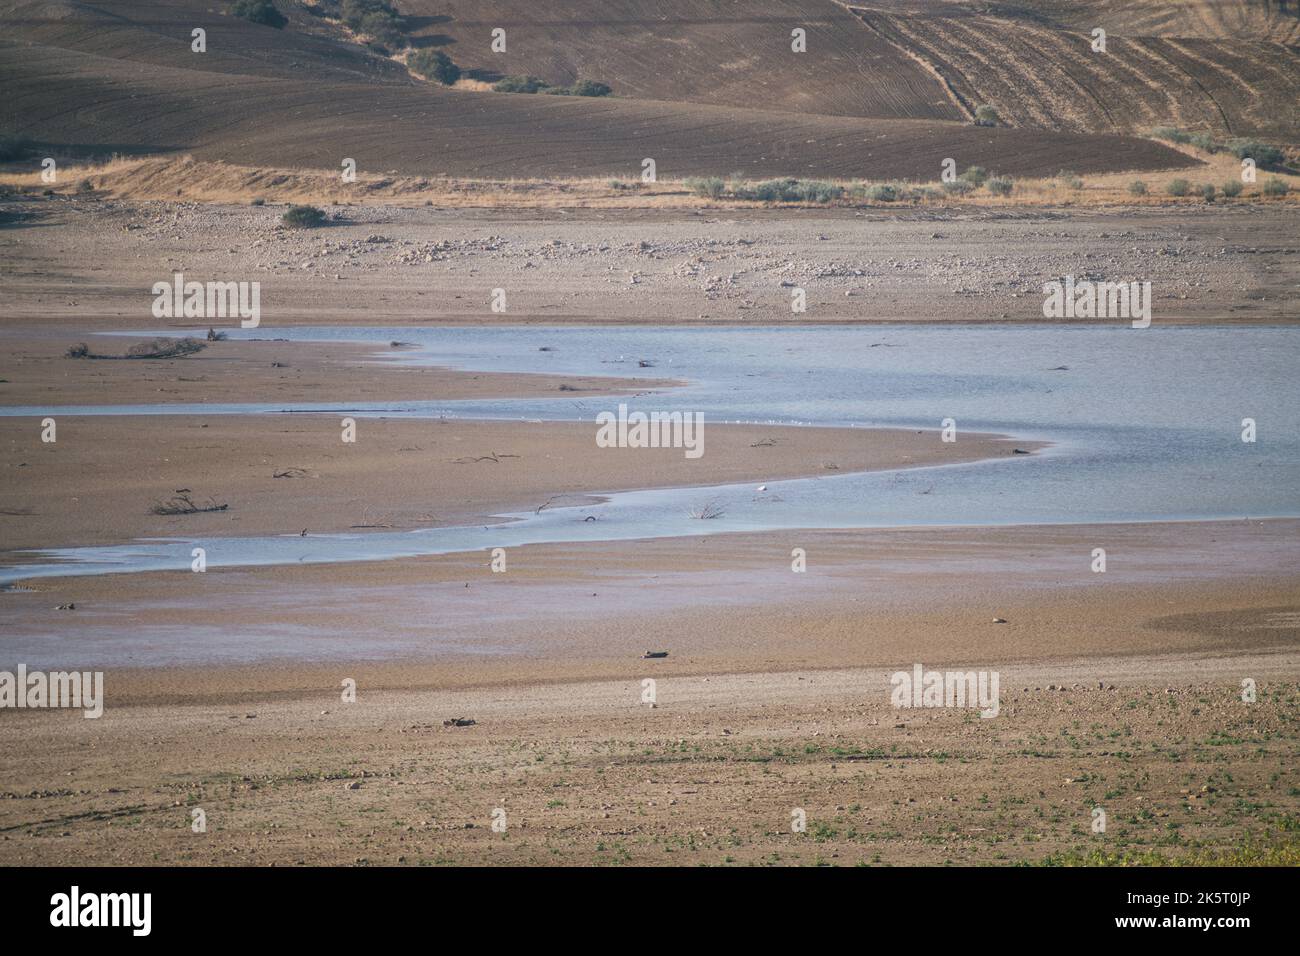 Concept: drought. Artificial swamp to reserve water for human consumption drying up due to climate change. Stock Photo